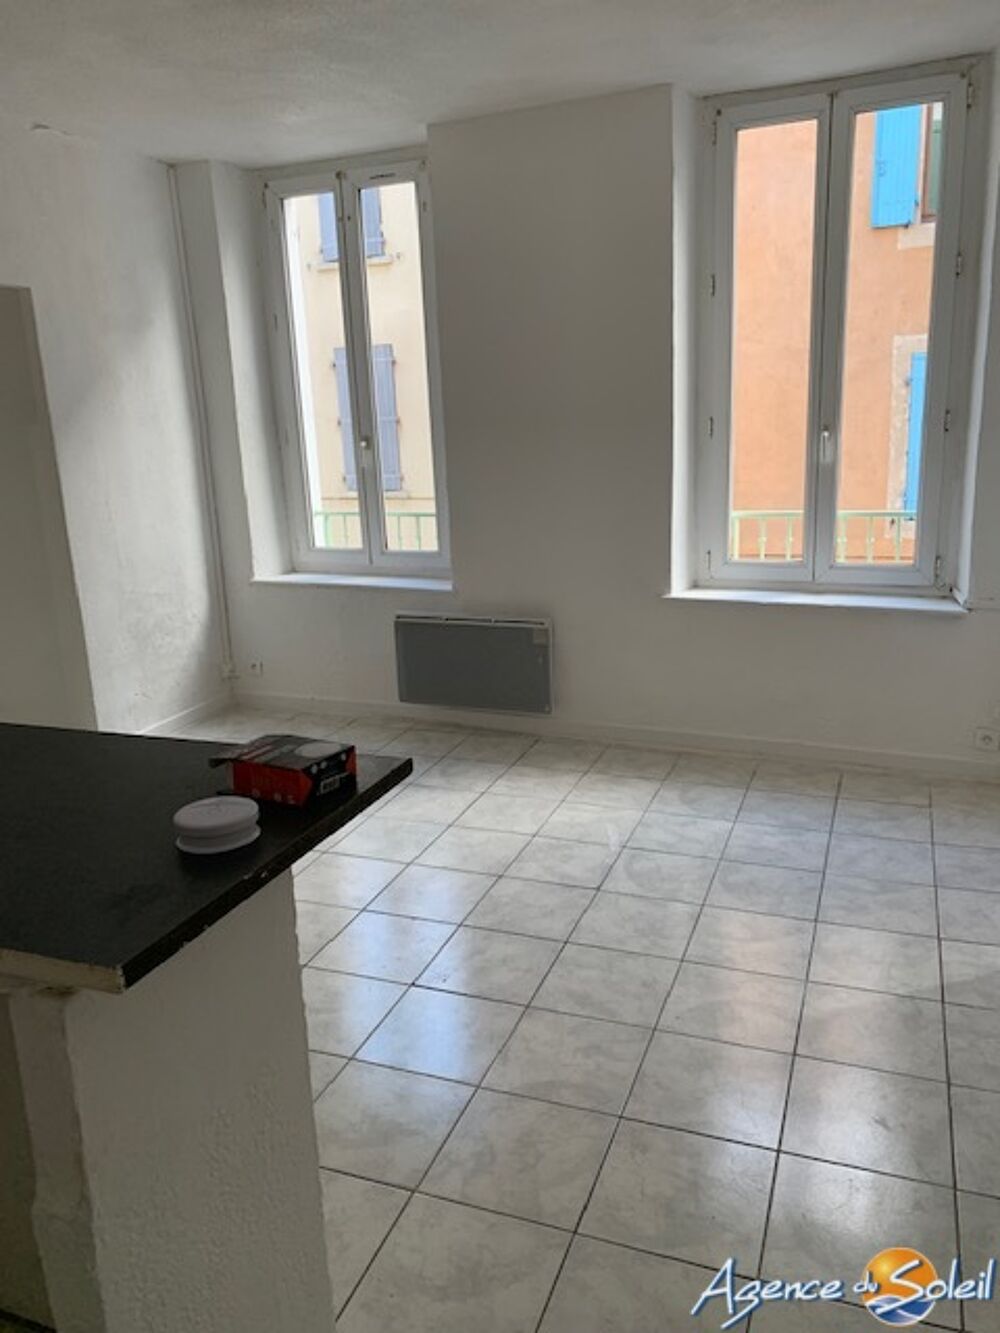 location Appartement - 2 pice(s) - 39 m Narbonne (11100)